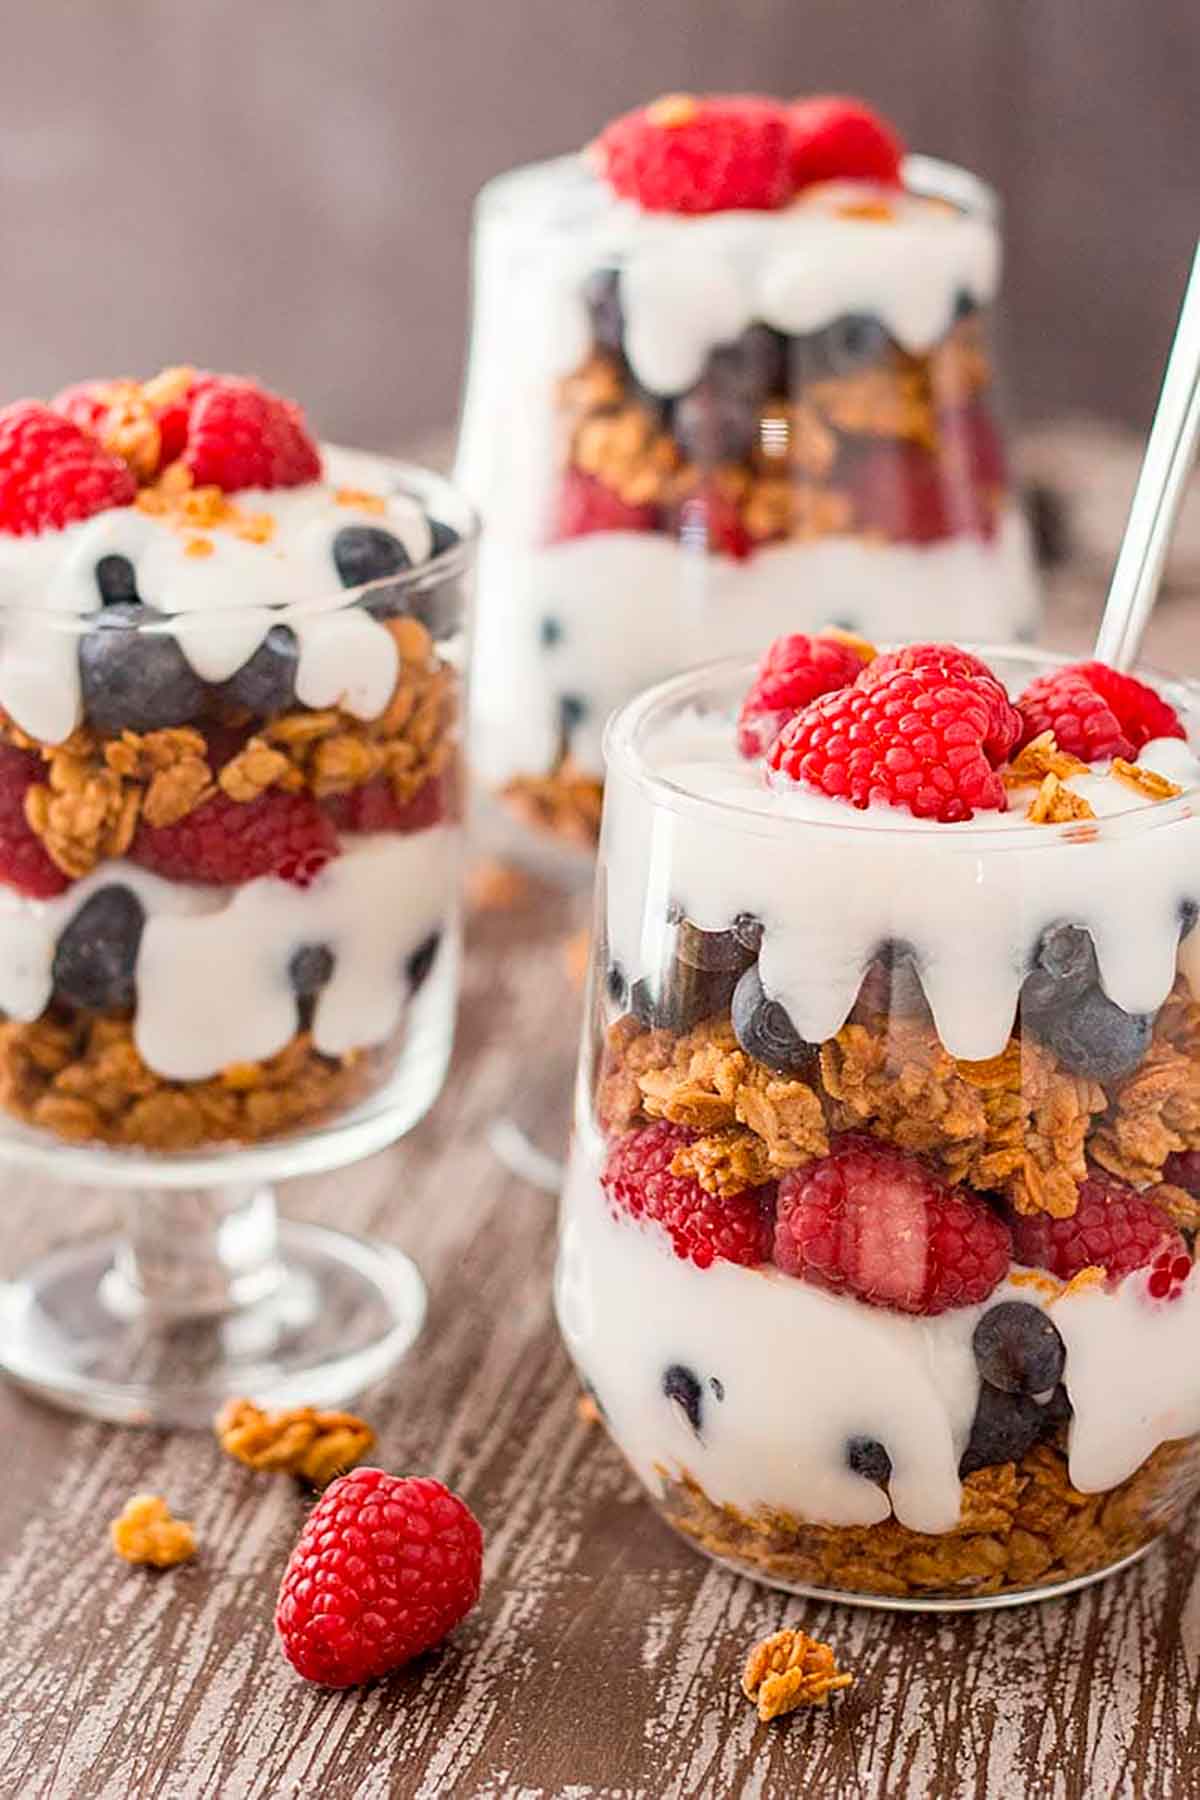 3 parfaits with berries, granola and cream on a table.